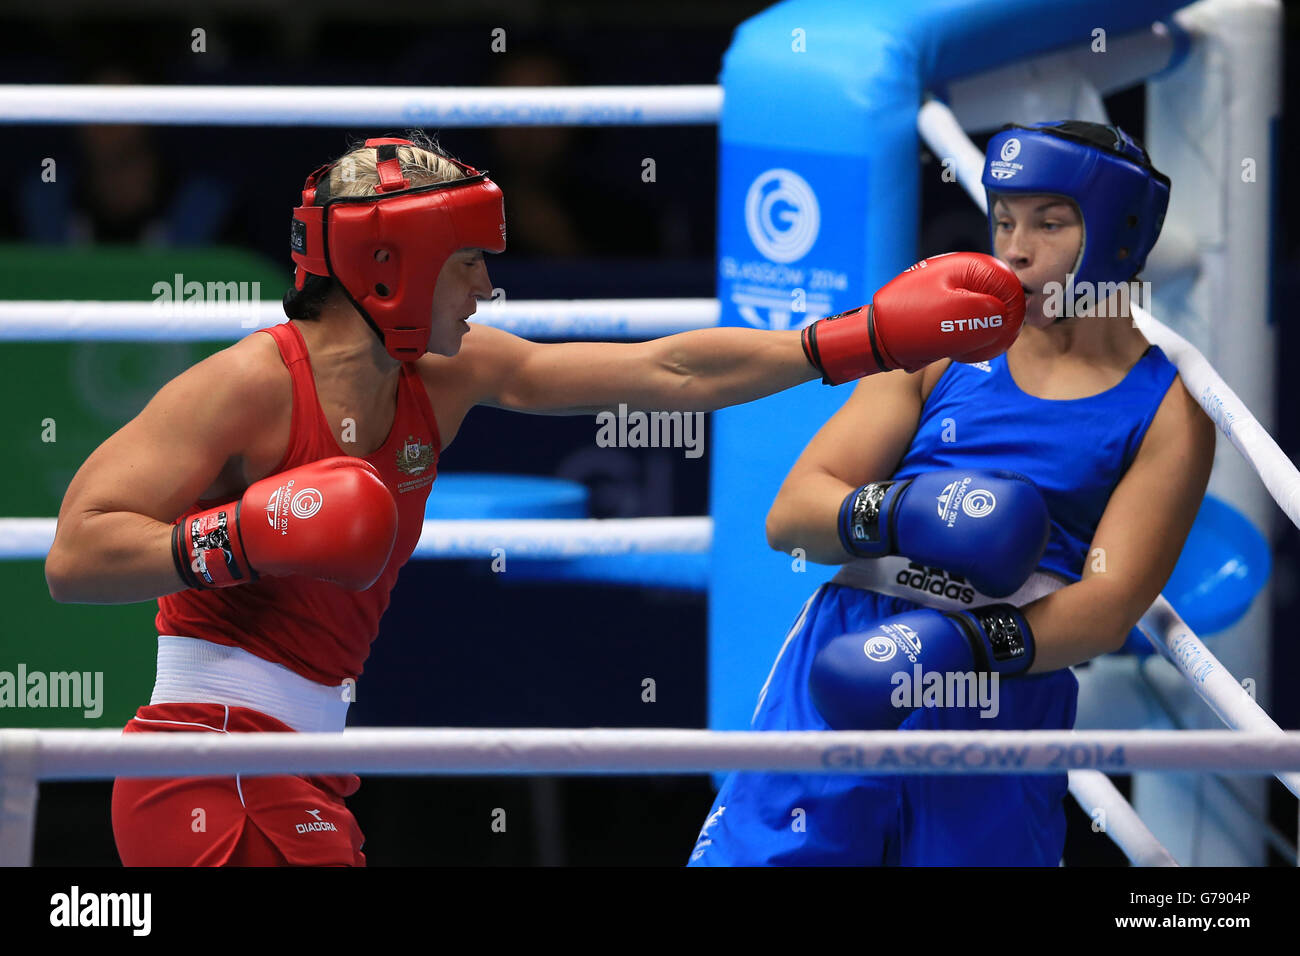 Wales' Lauren Price in action against Australia's Kaye Scott (left) in the Women's Middle Quarter-final at the SECC, during the 2014 Commonwealth Games in Glasgow. PRESS ASSOCIATION Photo. Picture date: Wednesday July 30, 2014. See PA story COMMONWEALTH Boxing. Photo credit should read: Peter Byrne/PA Wire. Stock Photo